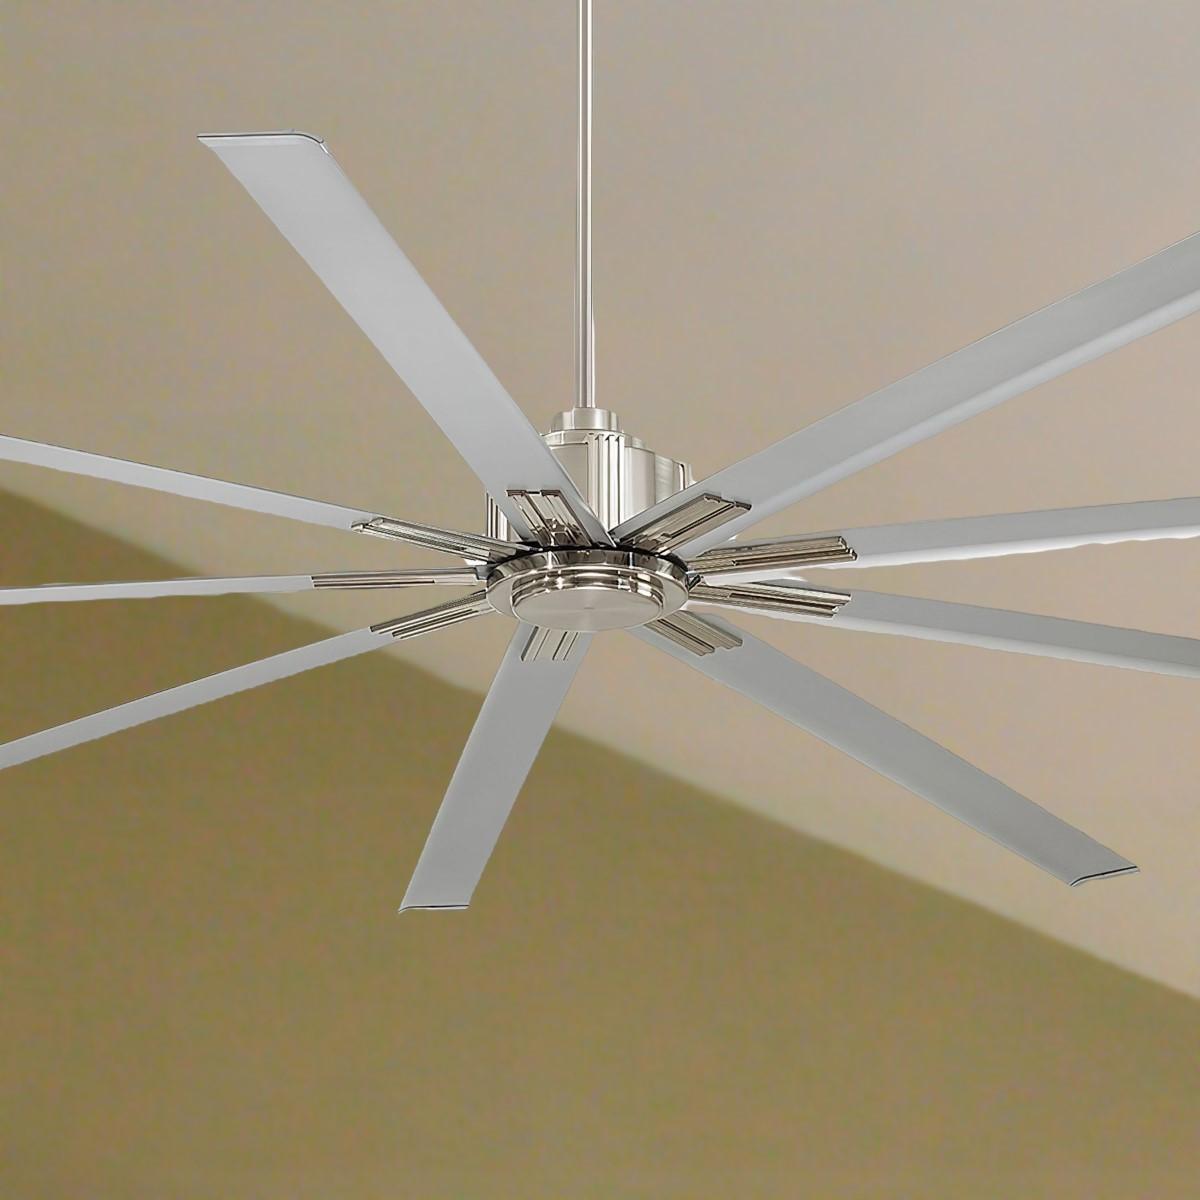 Xtreme 72 Inch Windmill Ceiling Fan With Remote